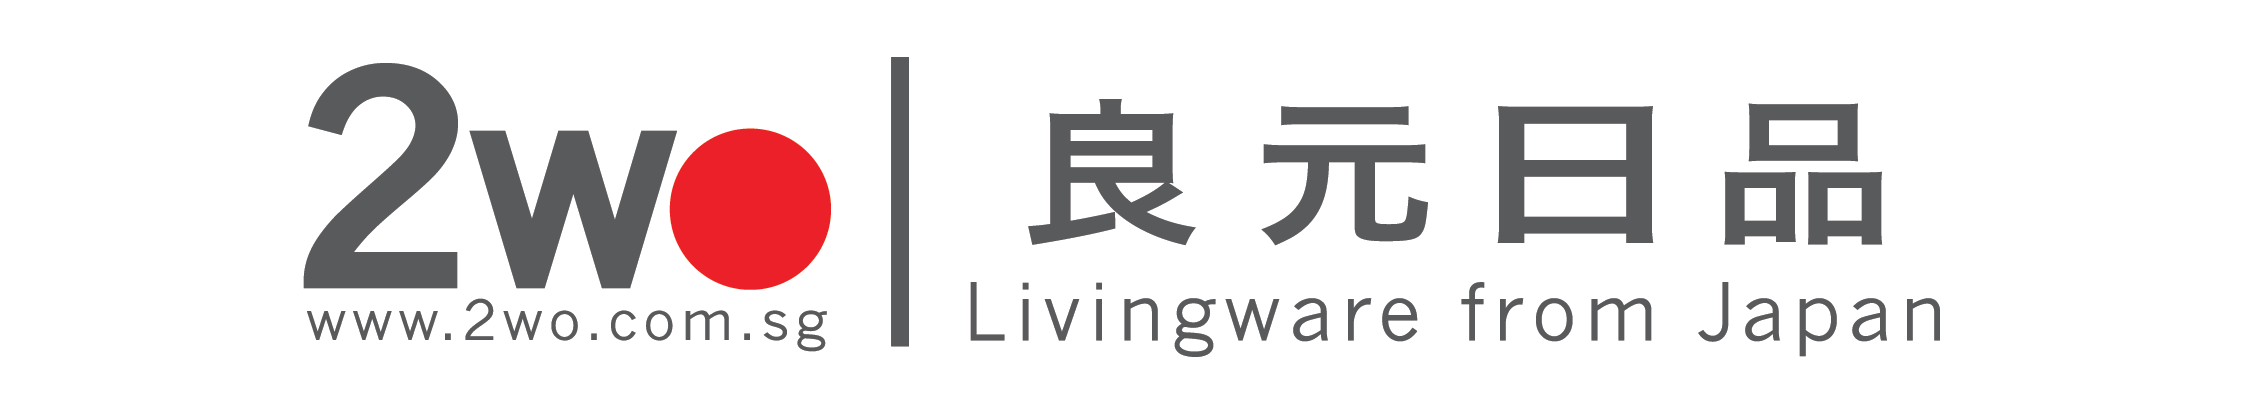 2wo Livingware Products